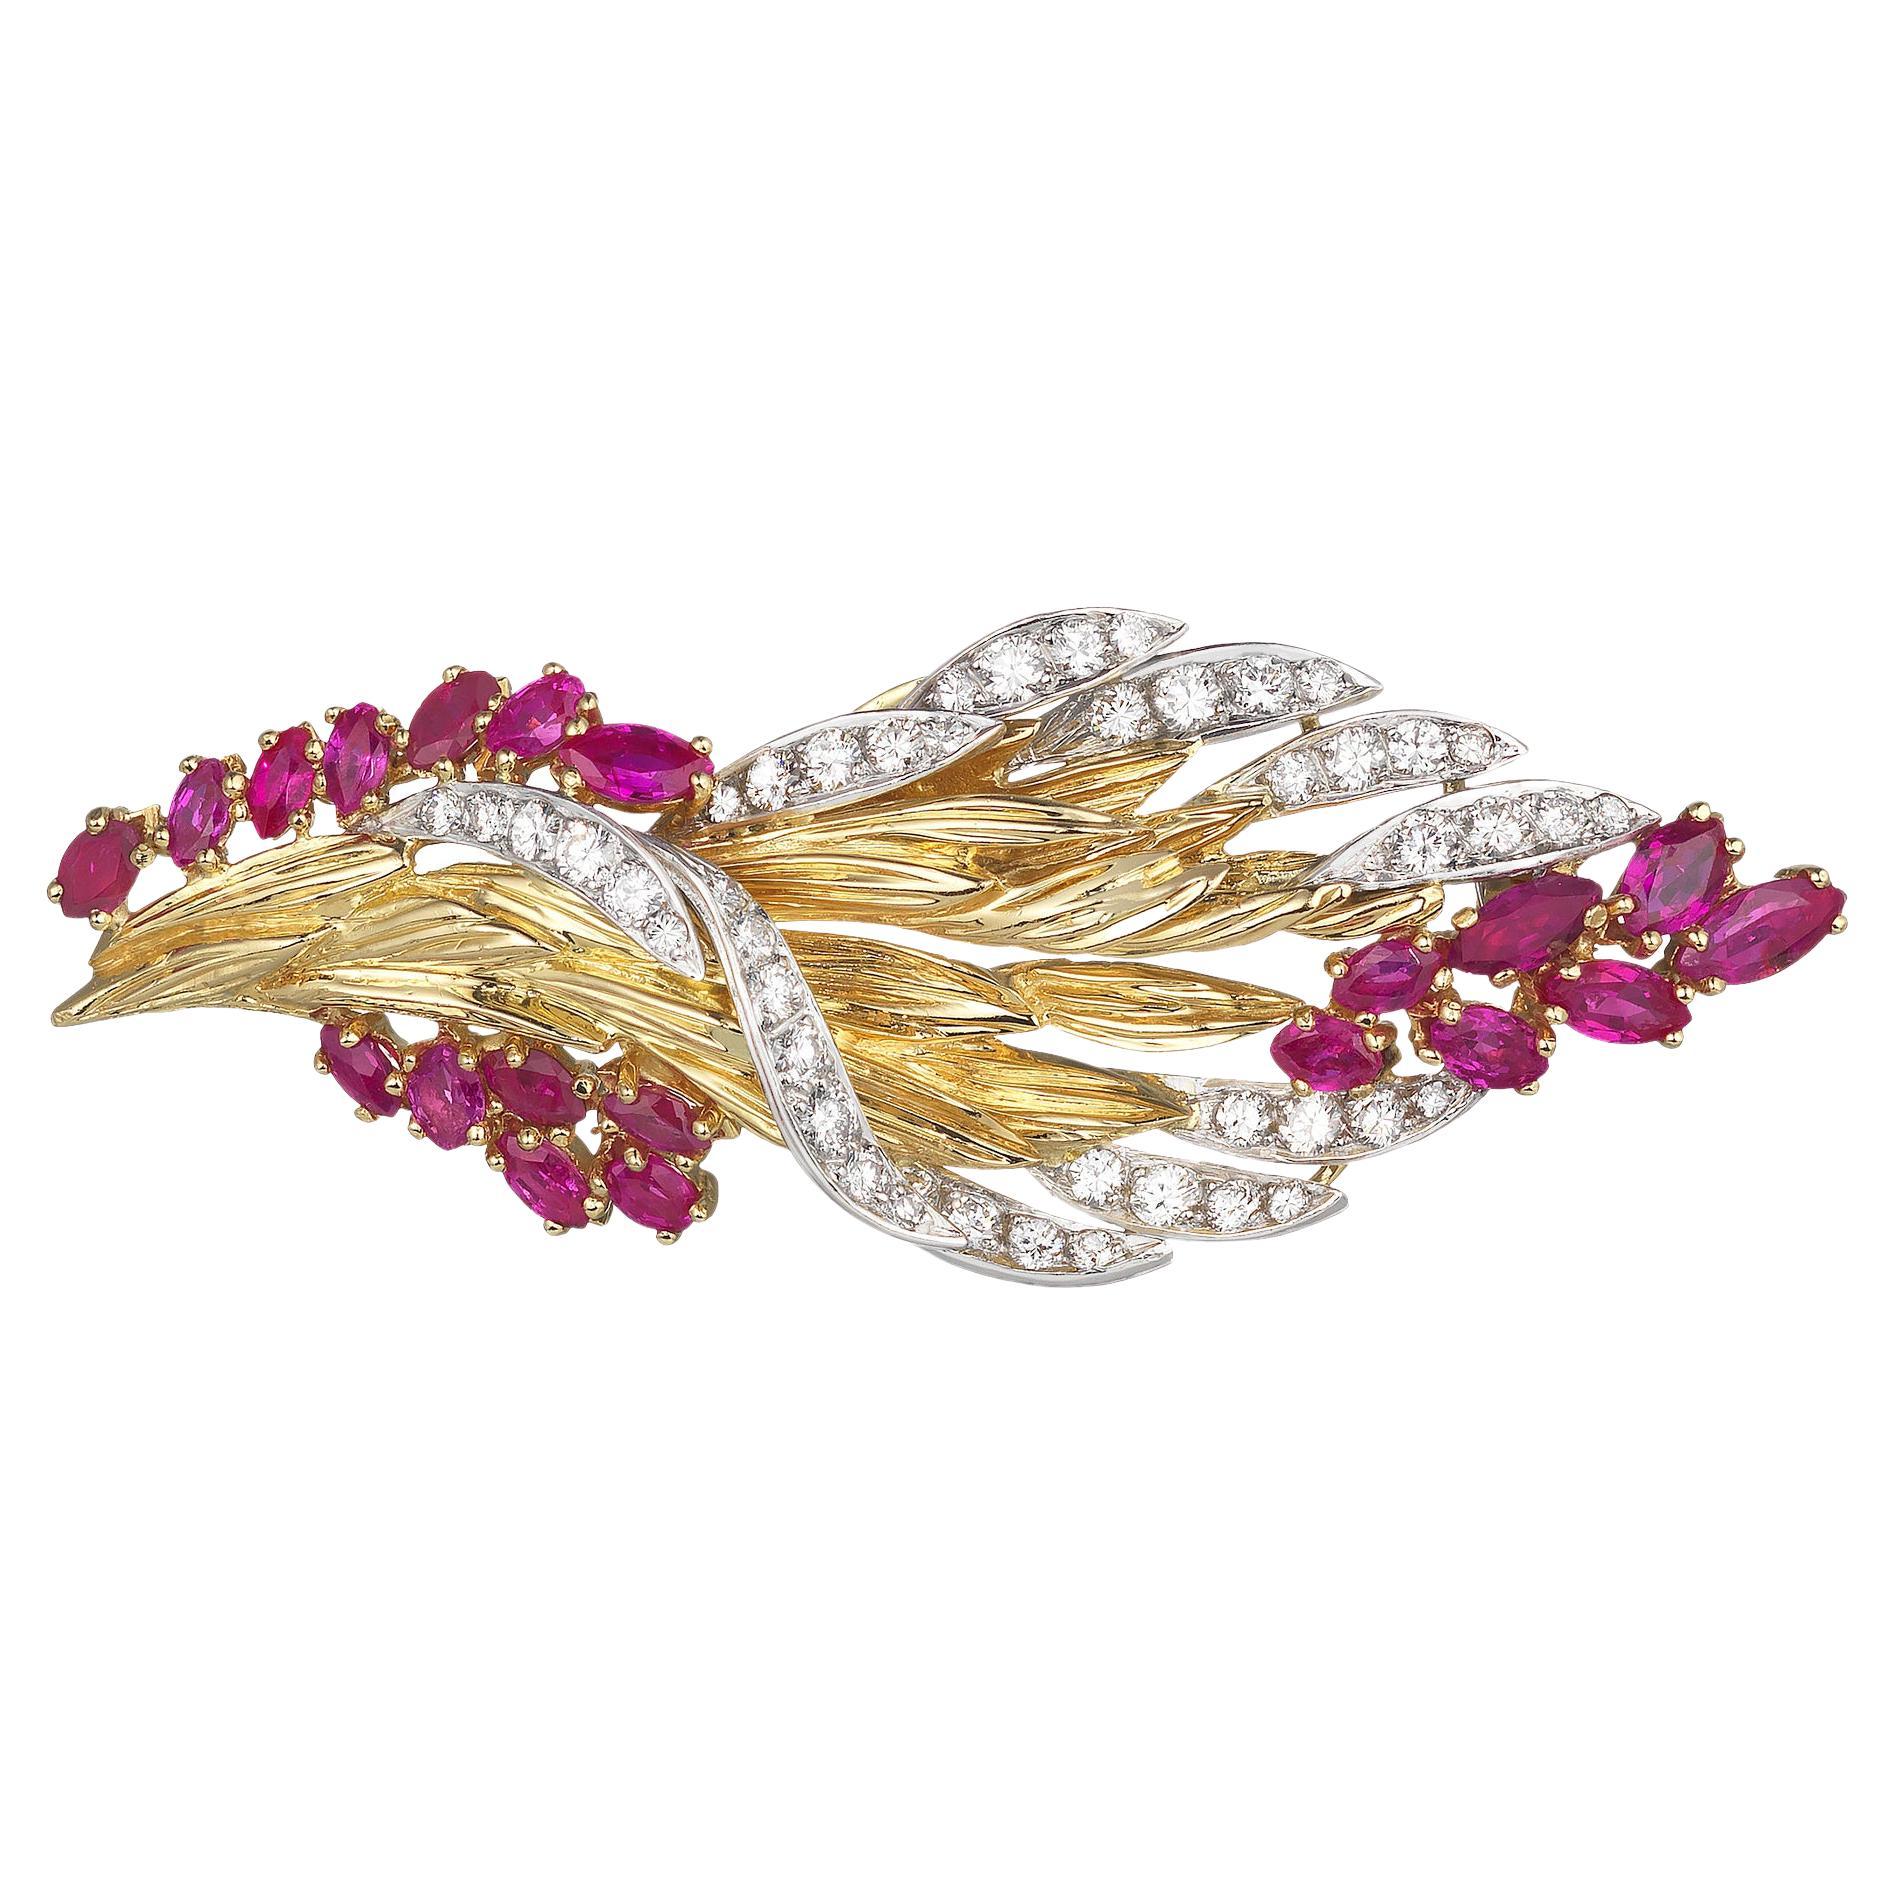 Retro 1950s Diamond Ruby Large Bouquet Brooch in 18K Gold & Platinum